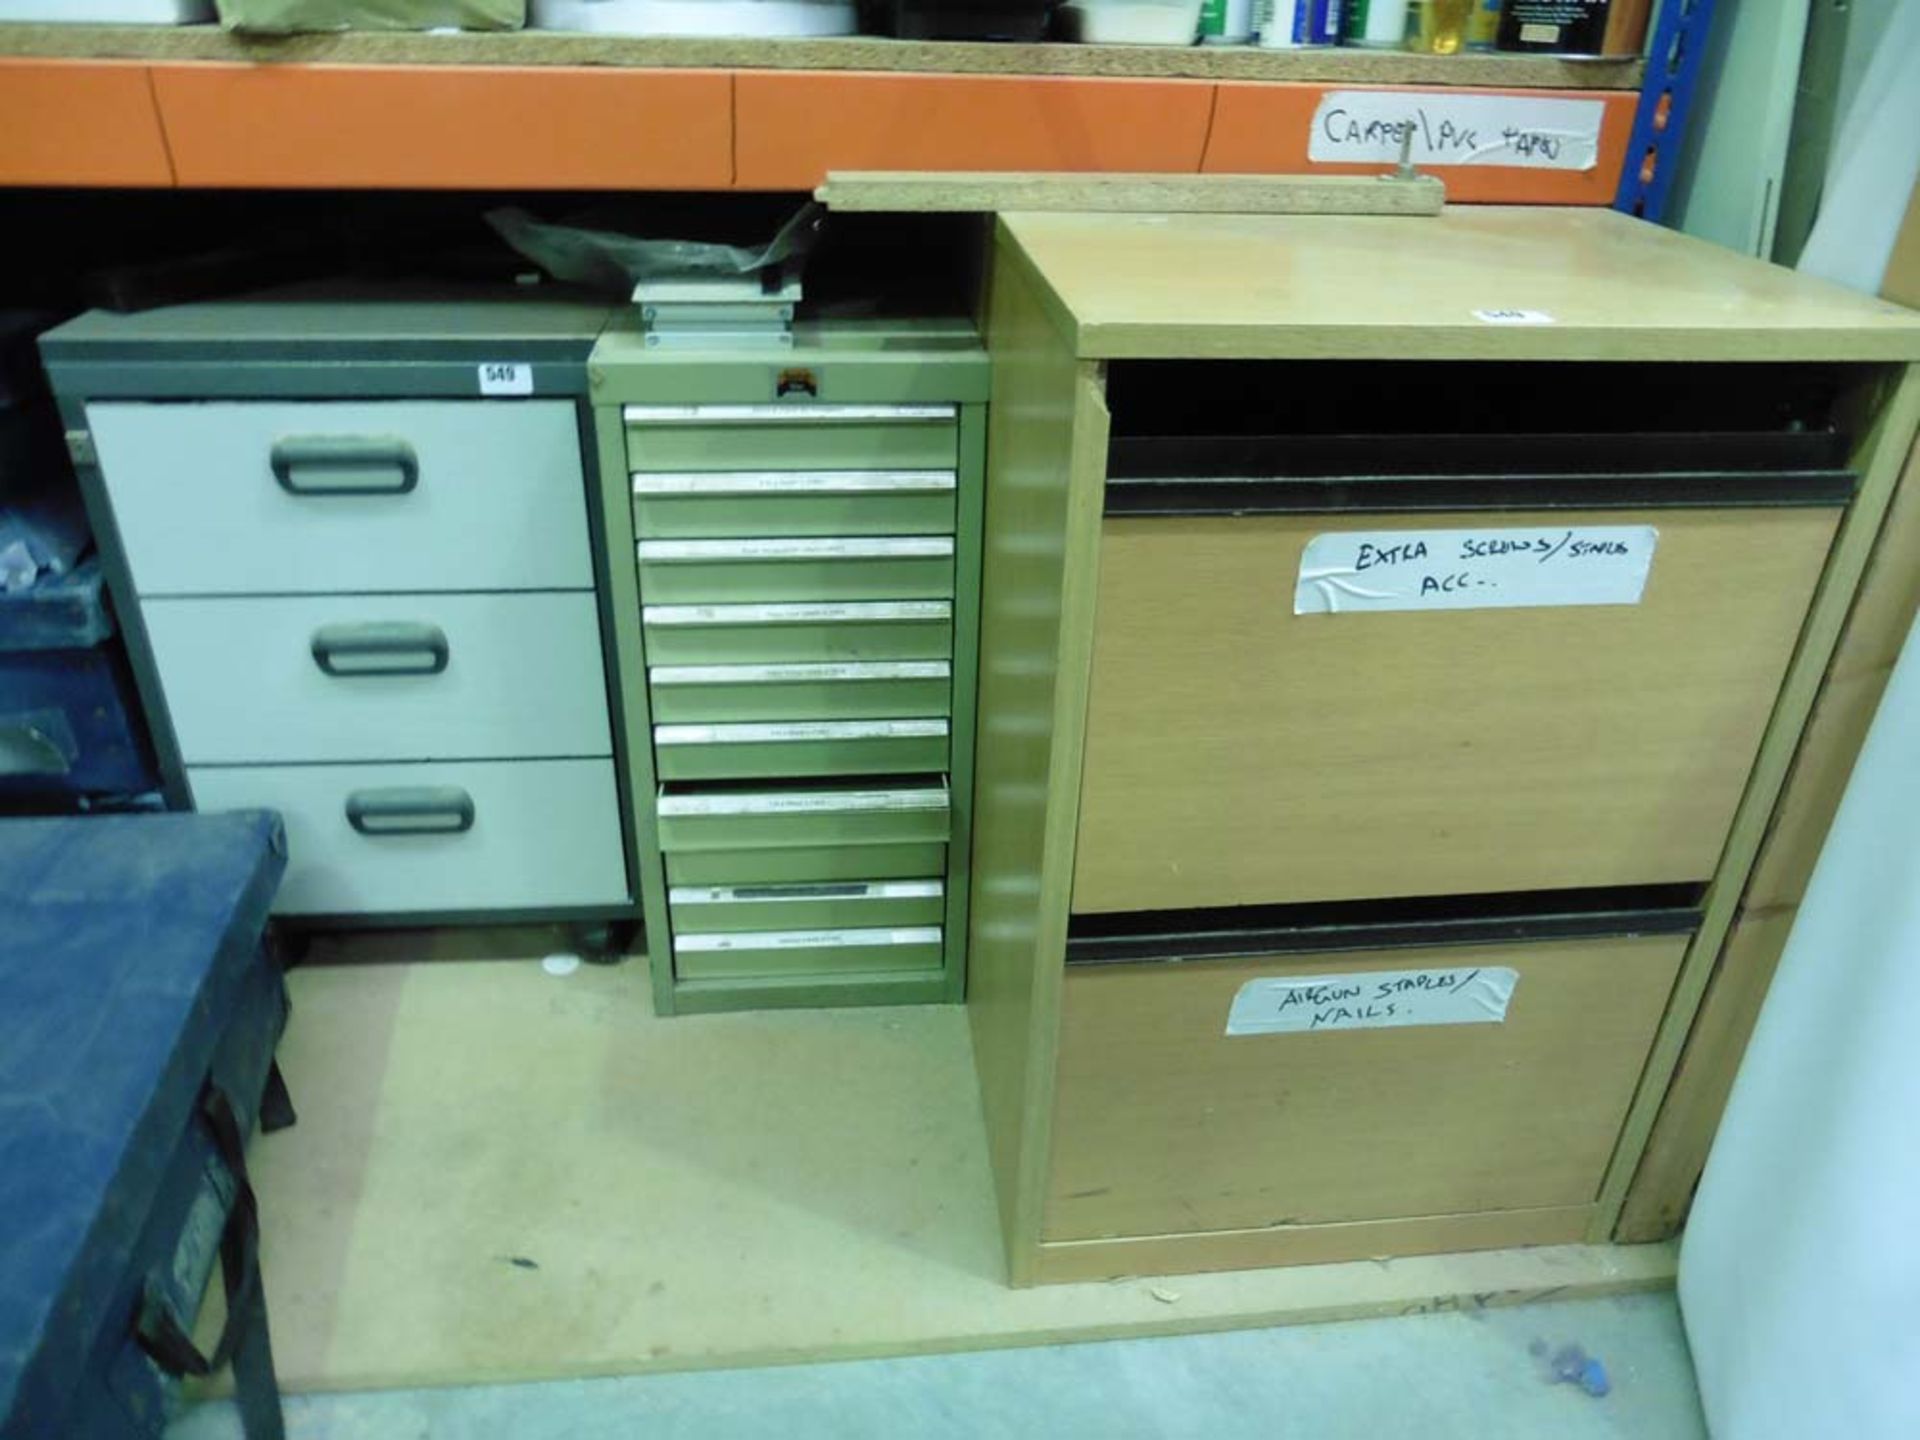 Multidrawer unit and 2 pedestals containing various straps, staples, and stationary